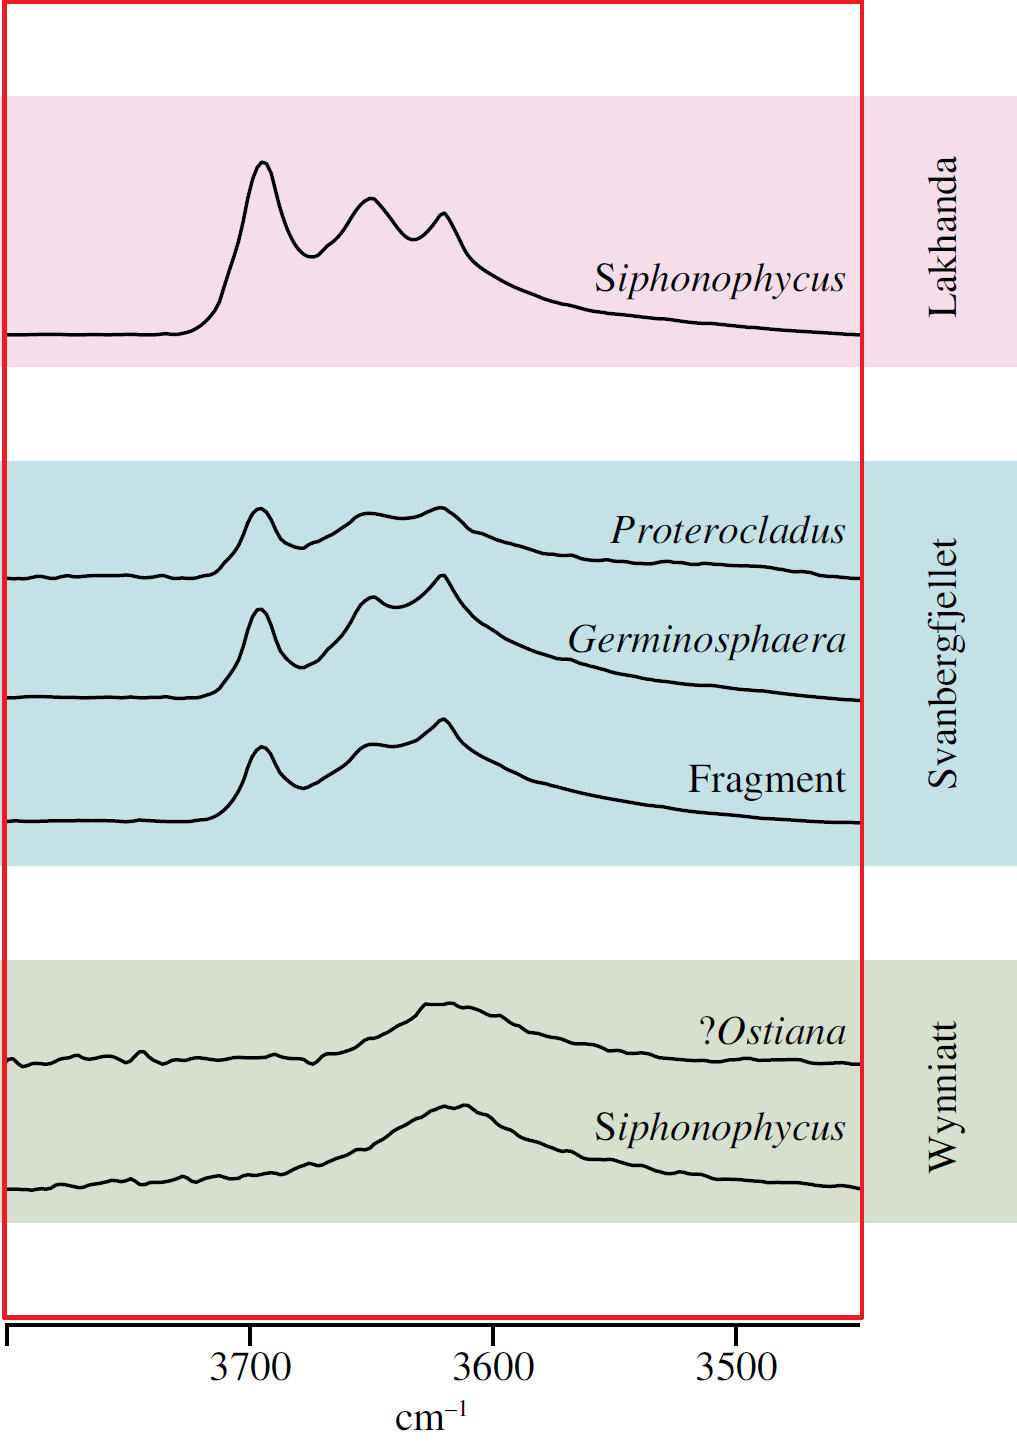 Representative Synchrotron IR microspectra (M-OH region) showing the mineralogical compositional changes of the clays of the different microfossils.